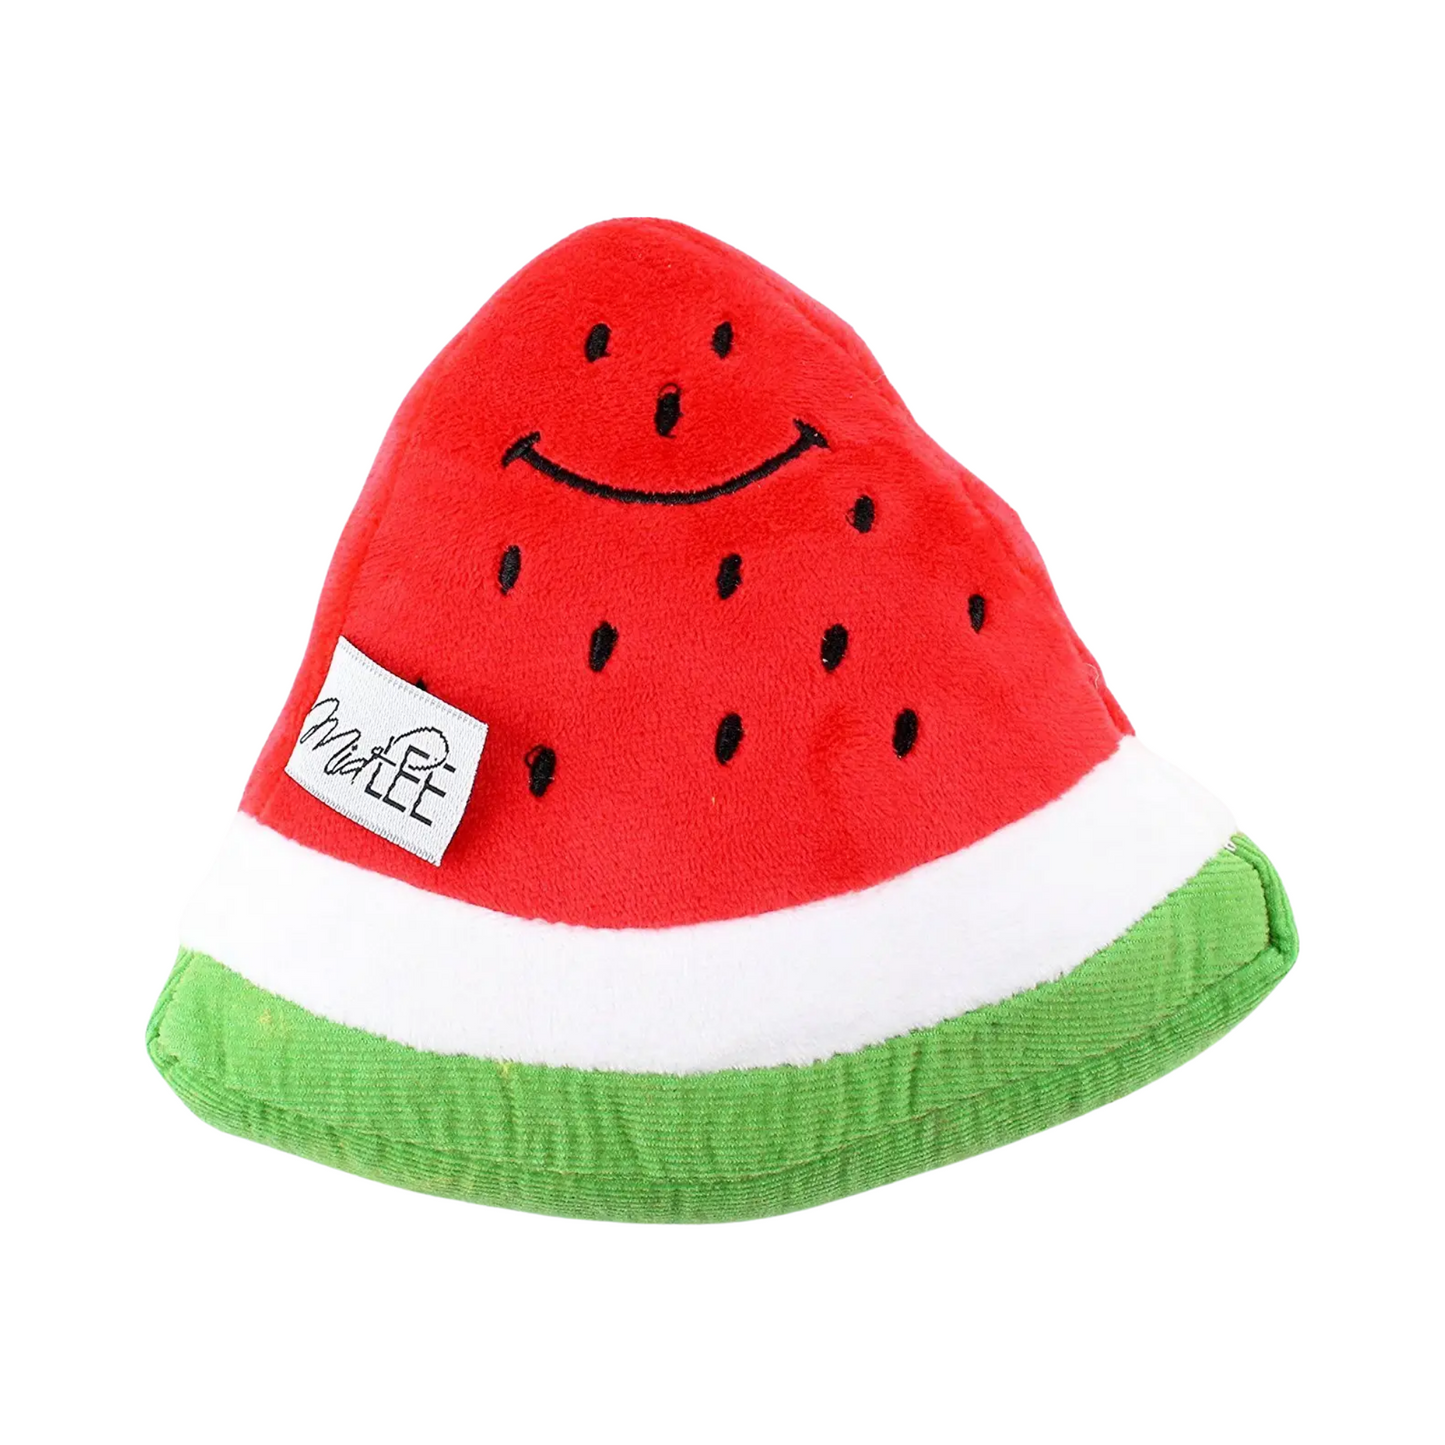 Midlee Smiley Watermelon Squeaker Plush Dog Toy